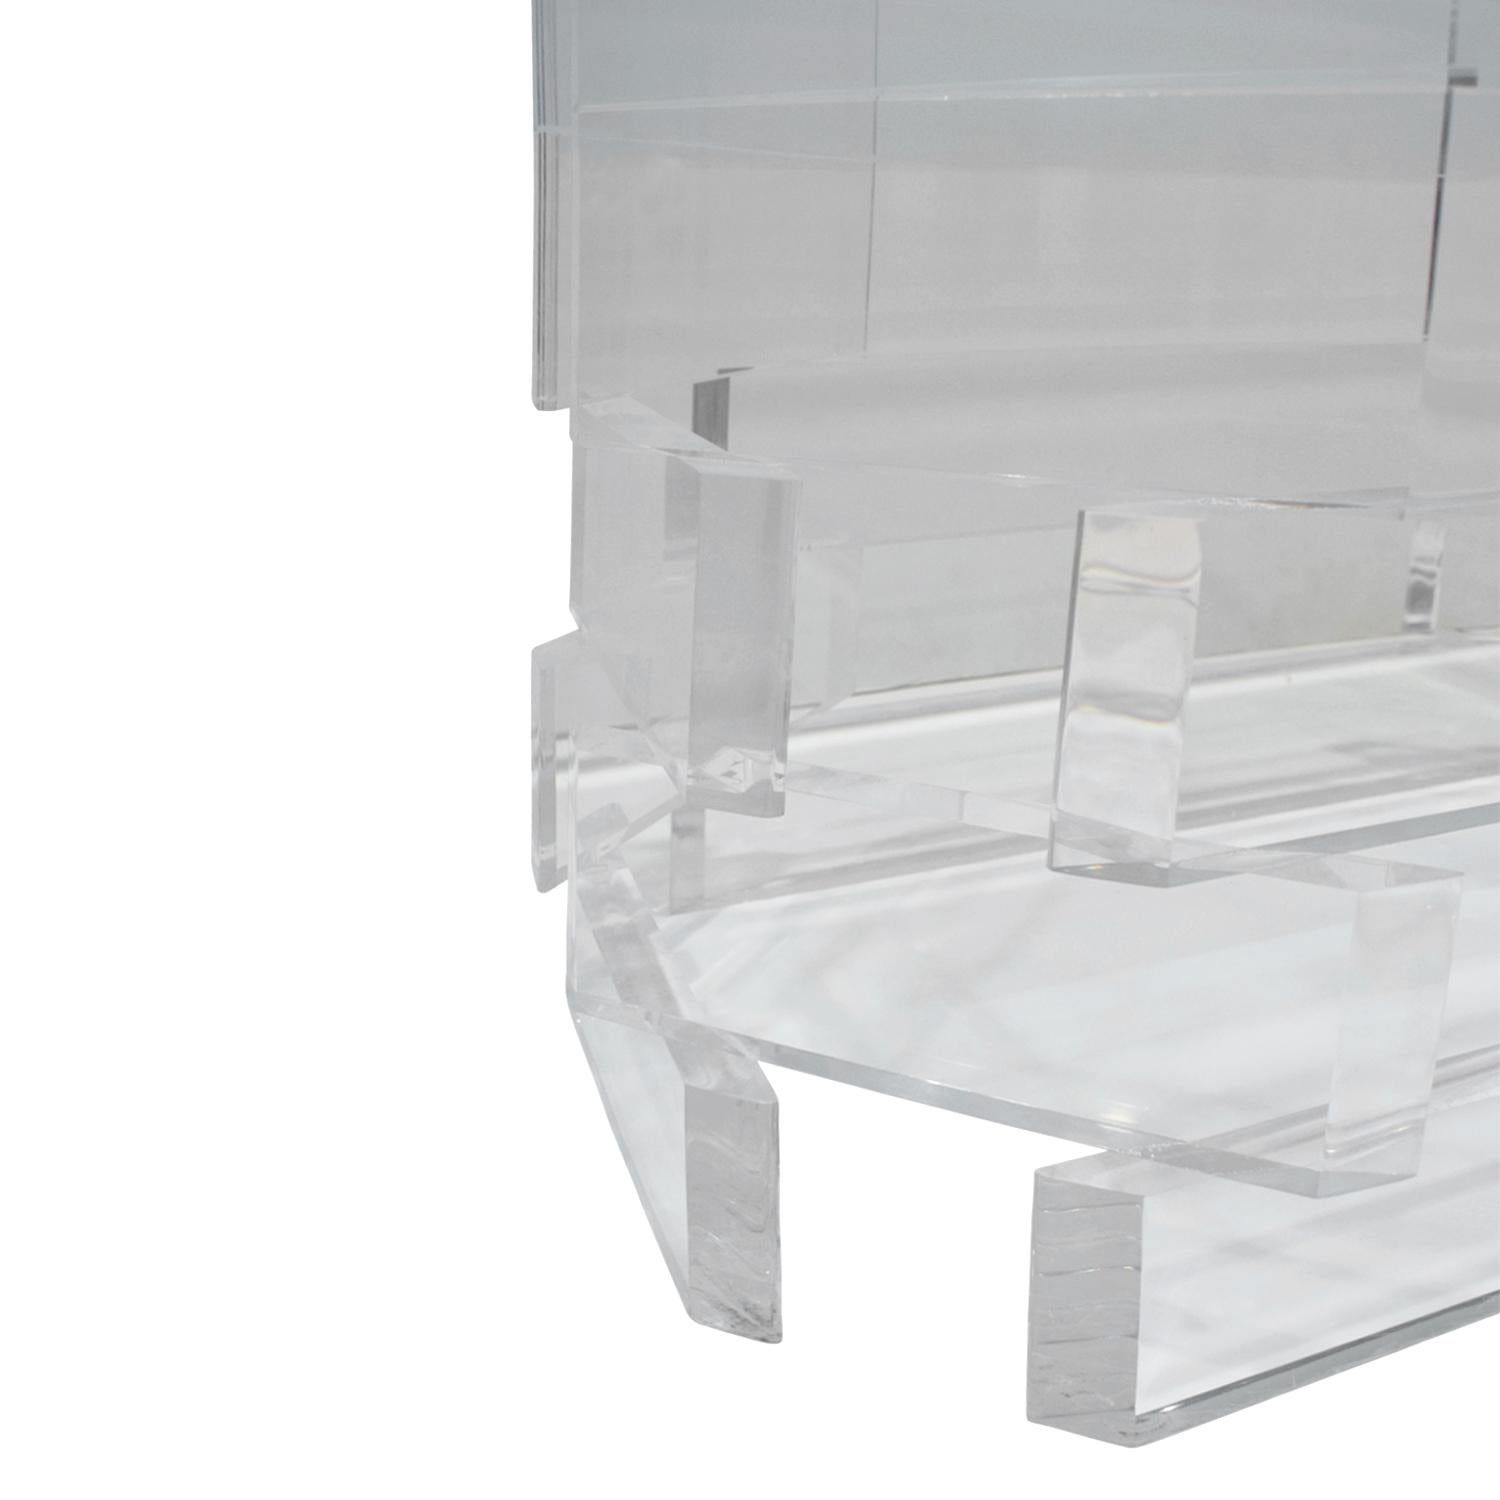 Late 20th Century Sculptural Lucite Coffee Table with Beveled Glass Top, 1970s